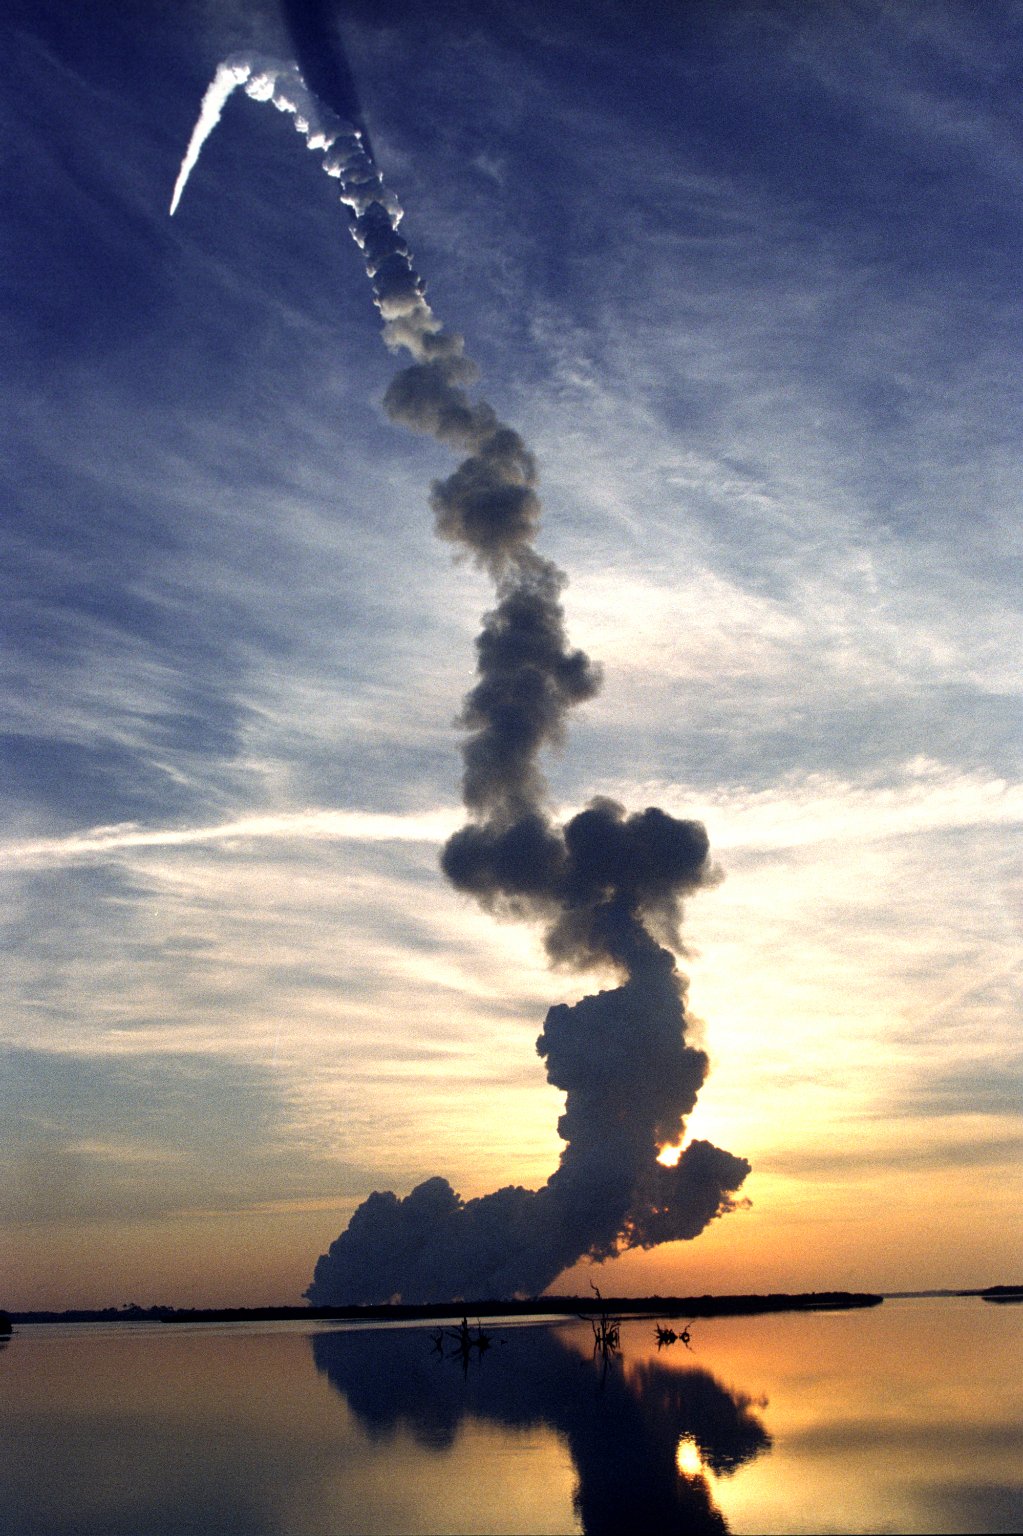 Every Picture Tells A Story: Interstellar Cloud Trail in 1999